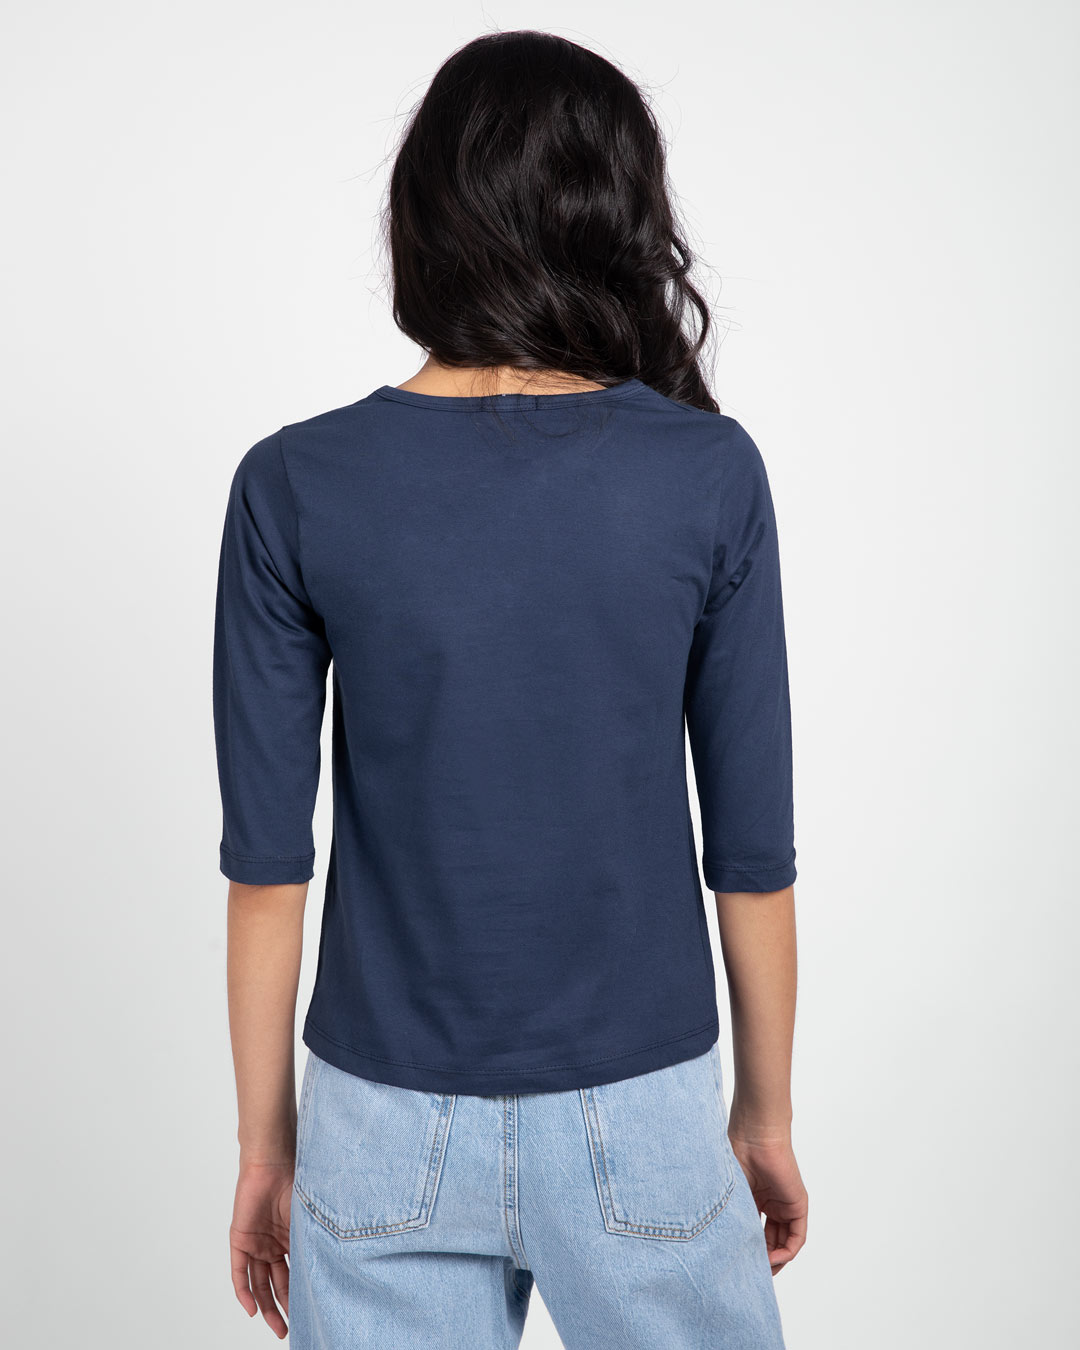 Shop Whatever You Want To Be Round Neck 3/4th Sleeve T-Shirt-Back